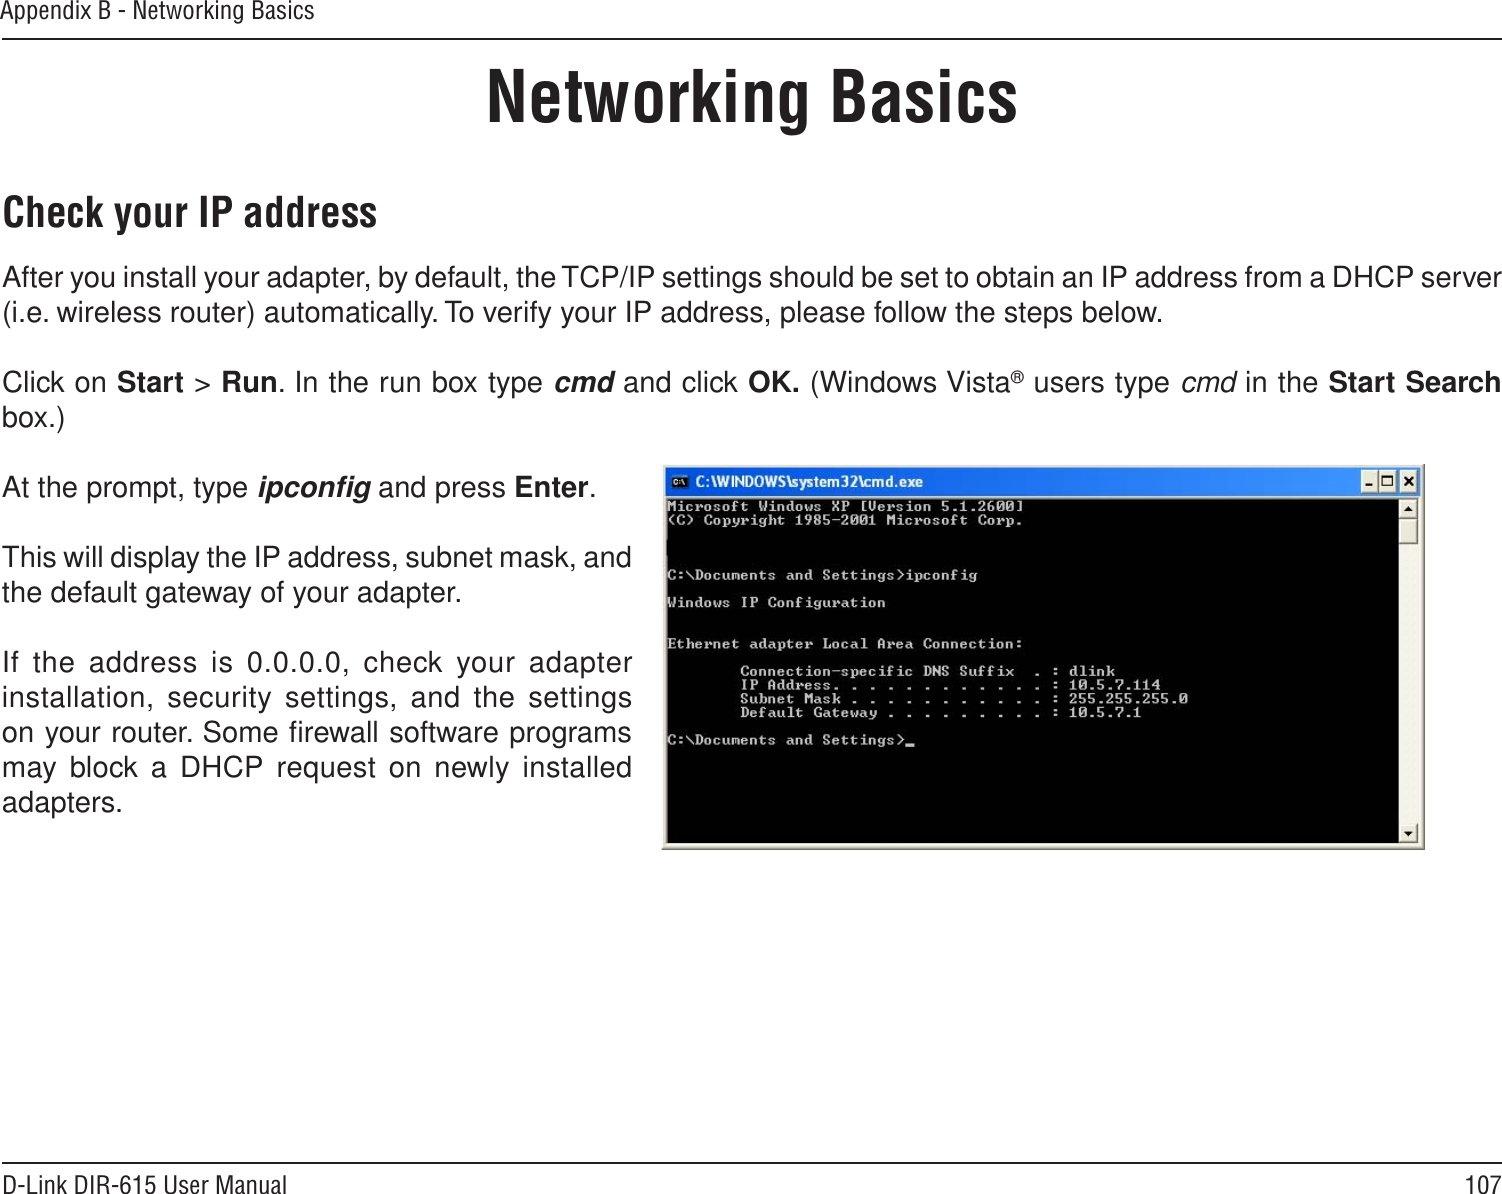 107D-Link DIR-615 User ManualAppendix B - Networking BasicsNetworking BasicsCheck your IP addressAfter you install your adapter, by default, the TCP/IP settings should be set to obtain an IP address from a DHCP server (i.e. wireless router) automatically. To verify your IP address, please follow the steps below.Click on Start &gt; Run. In the run box type cmd and click OK. (Windows Vista® users type cmd in the Start Search box.)At the prompt, type ipconﬁg and press Enter.This will display the IP address, subnet mask, and the default gateway of your adapter.If the address is 0.0.0.0, check  your adapter installation, security settings, and the settings on your router. Some ﬁrewall software programs may block a DHCP request on newly installed adapters. 